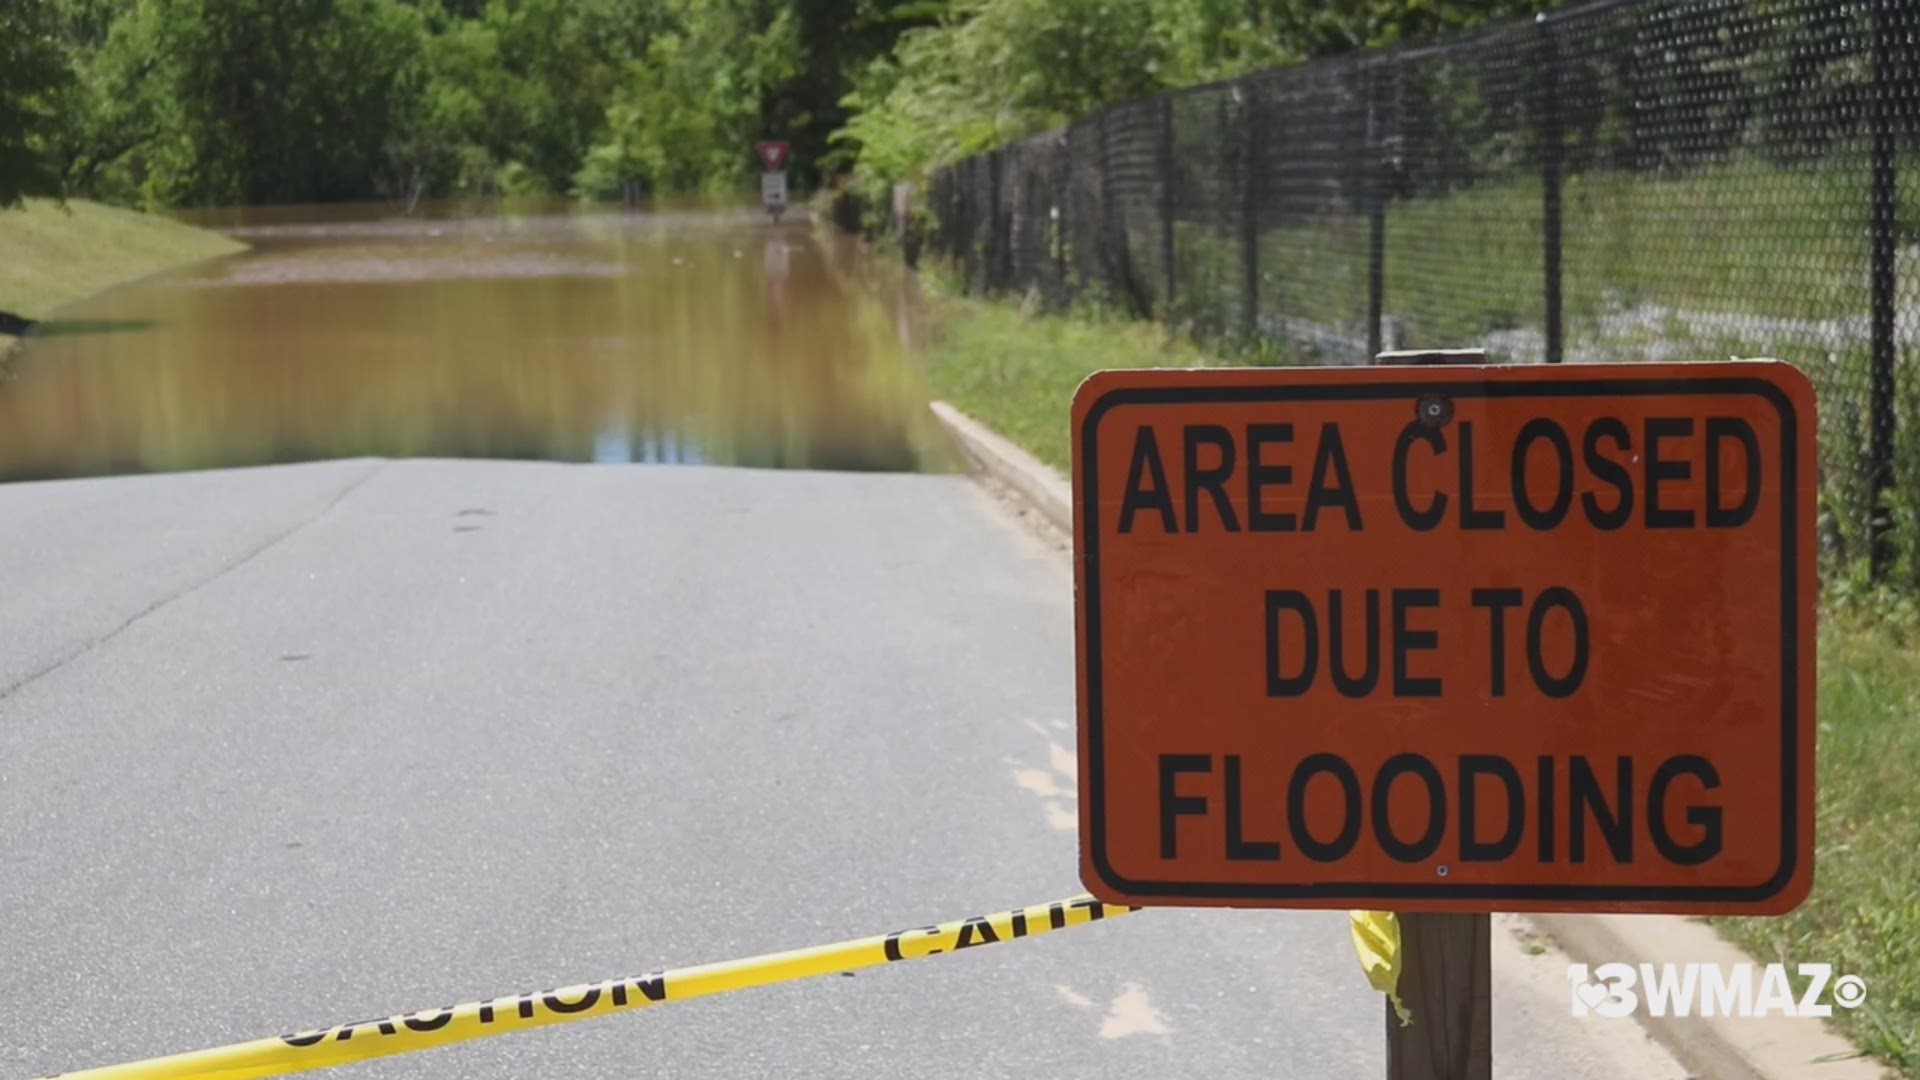 The National Weather Service is reporting the Ocmulgee River is in minor flood stage in Macon, at around 23 feet. Parts of Amerson River Park and the Ocmulgee Heritage Trail are closed as a result.